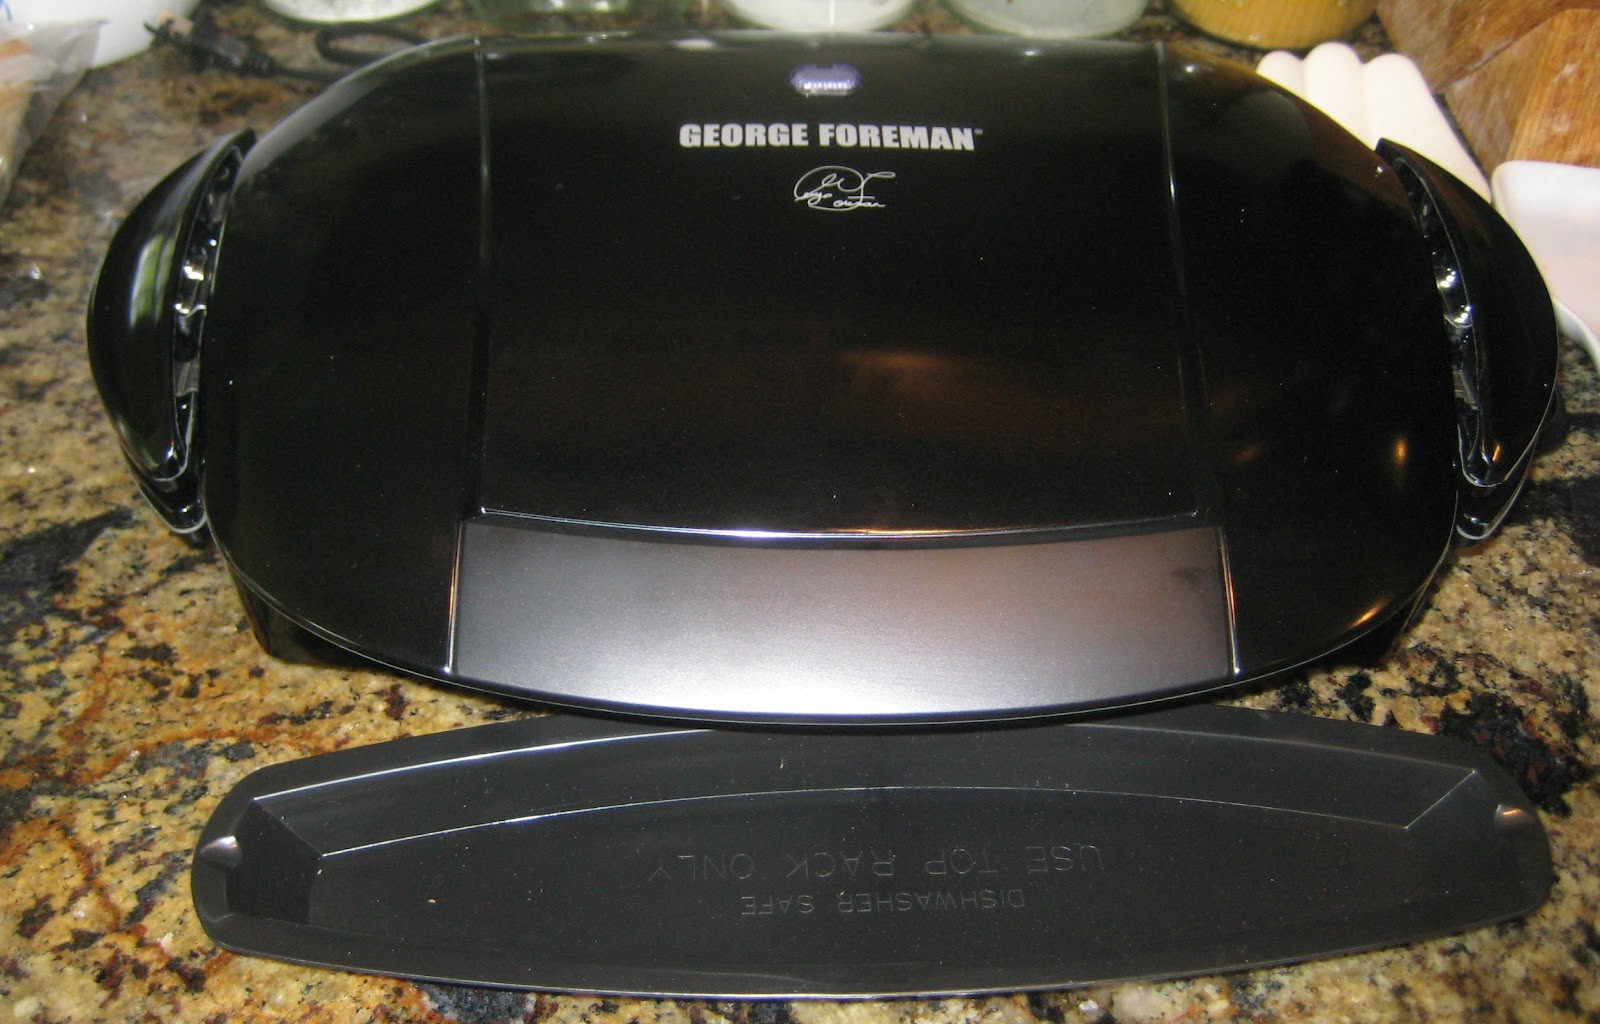 George Foreman Grill Hot Dogs
 The Art of Random Willy Nillyness The George Foreman